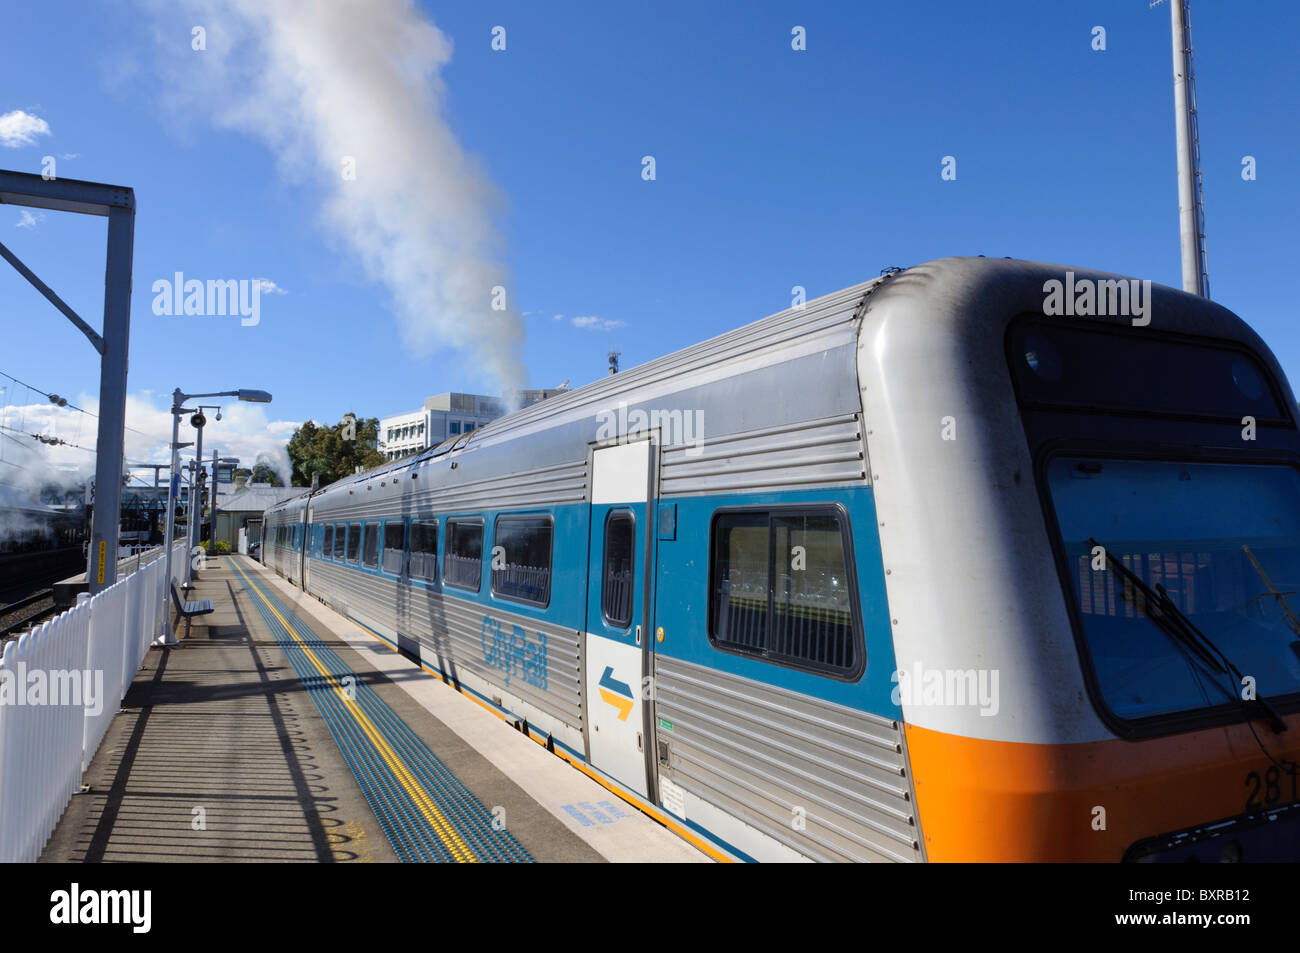 Diesel train producing a plume of smoke before departure from the station platform. Diesel multiple unit; emissions; exhaust fumes; passenger train Stock Photo